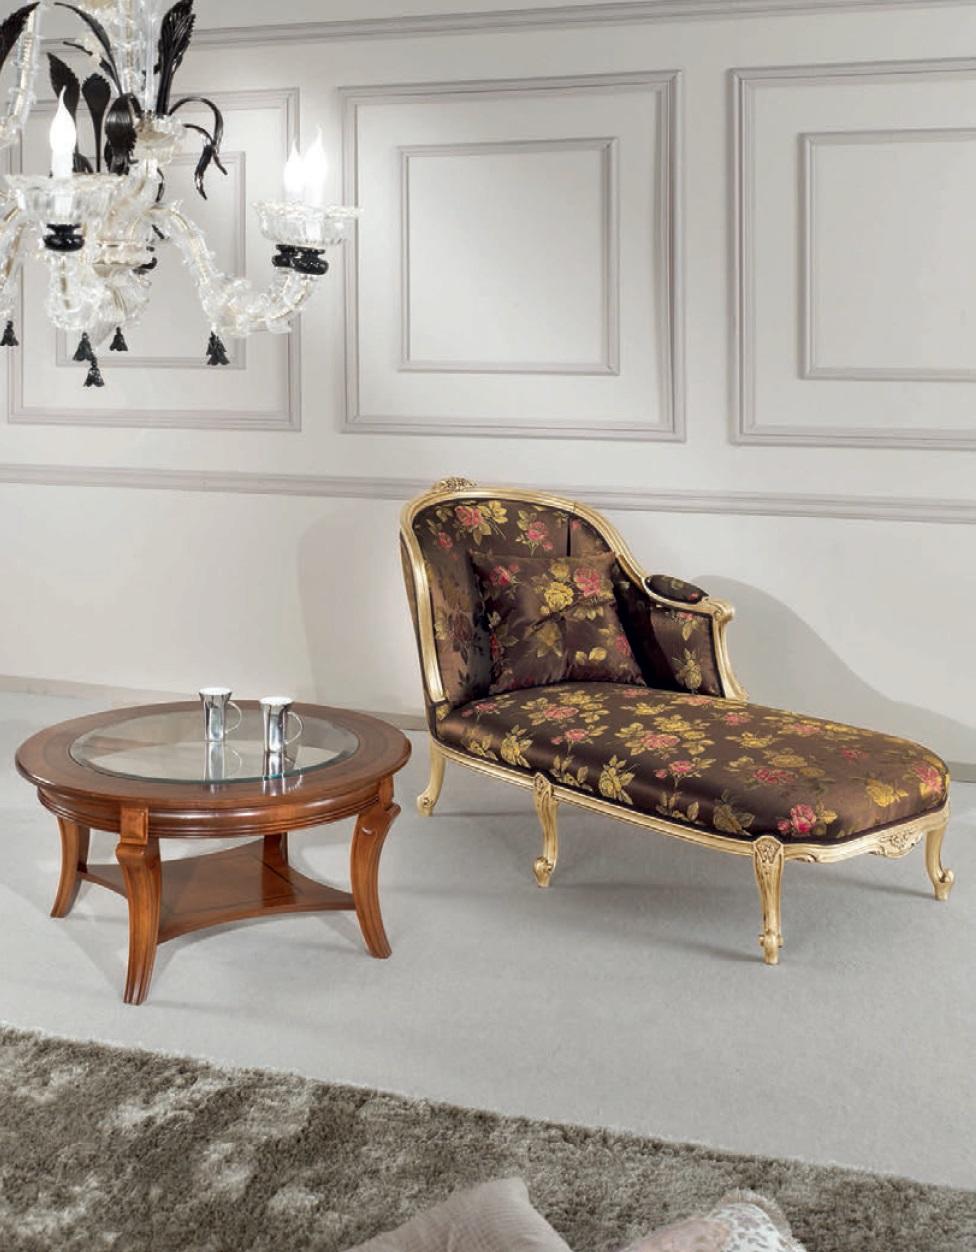 Classic Chaise Longue + Coffee Table Gold Flowers Lounger Italian Furniture Table